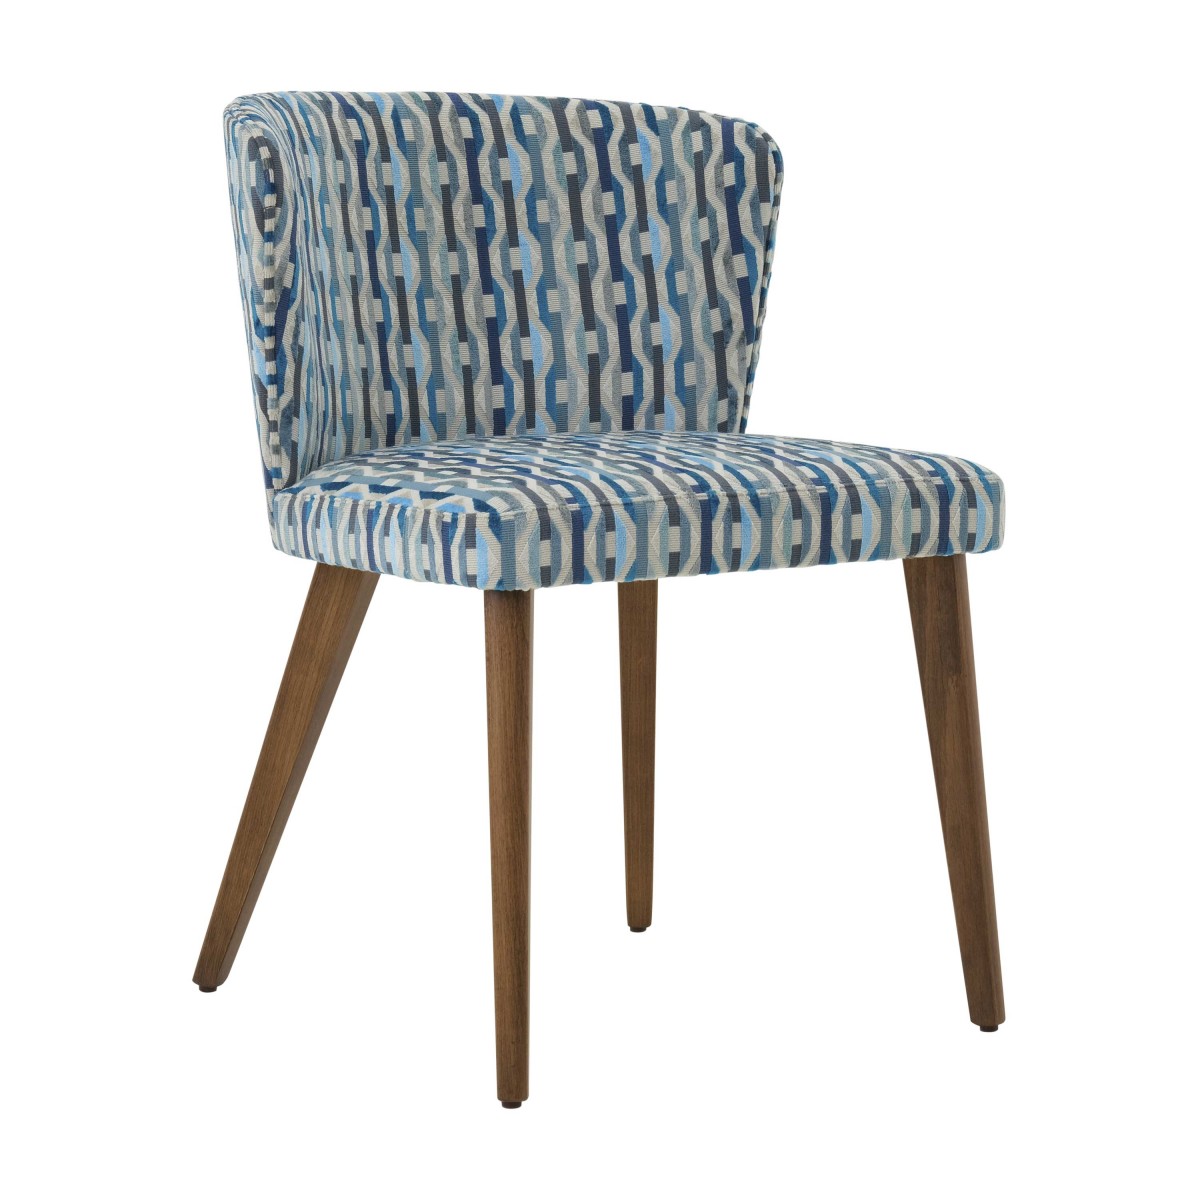 Contemporary dining chair Eva by Sevensedie -  beech wood frame -  comfortable and fully upholstered rounded back - upholstered in a blue chenille fabric - Polished in a satin walnut finish 